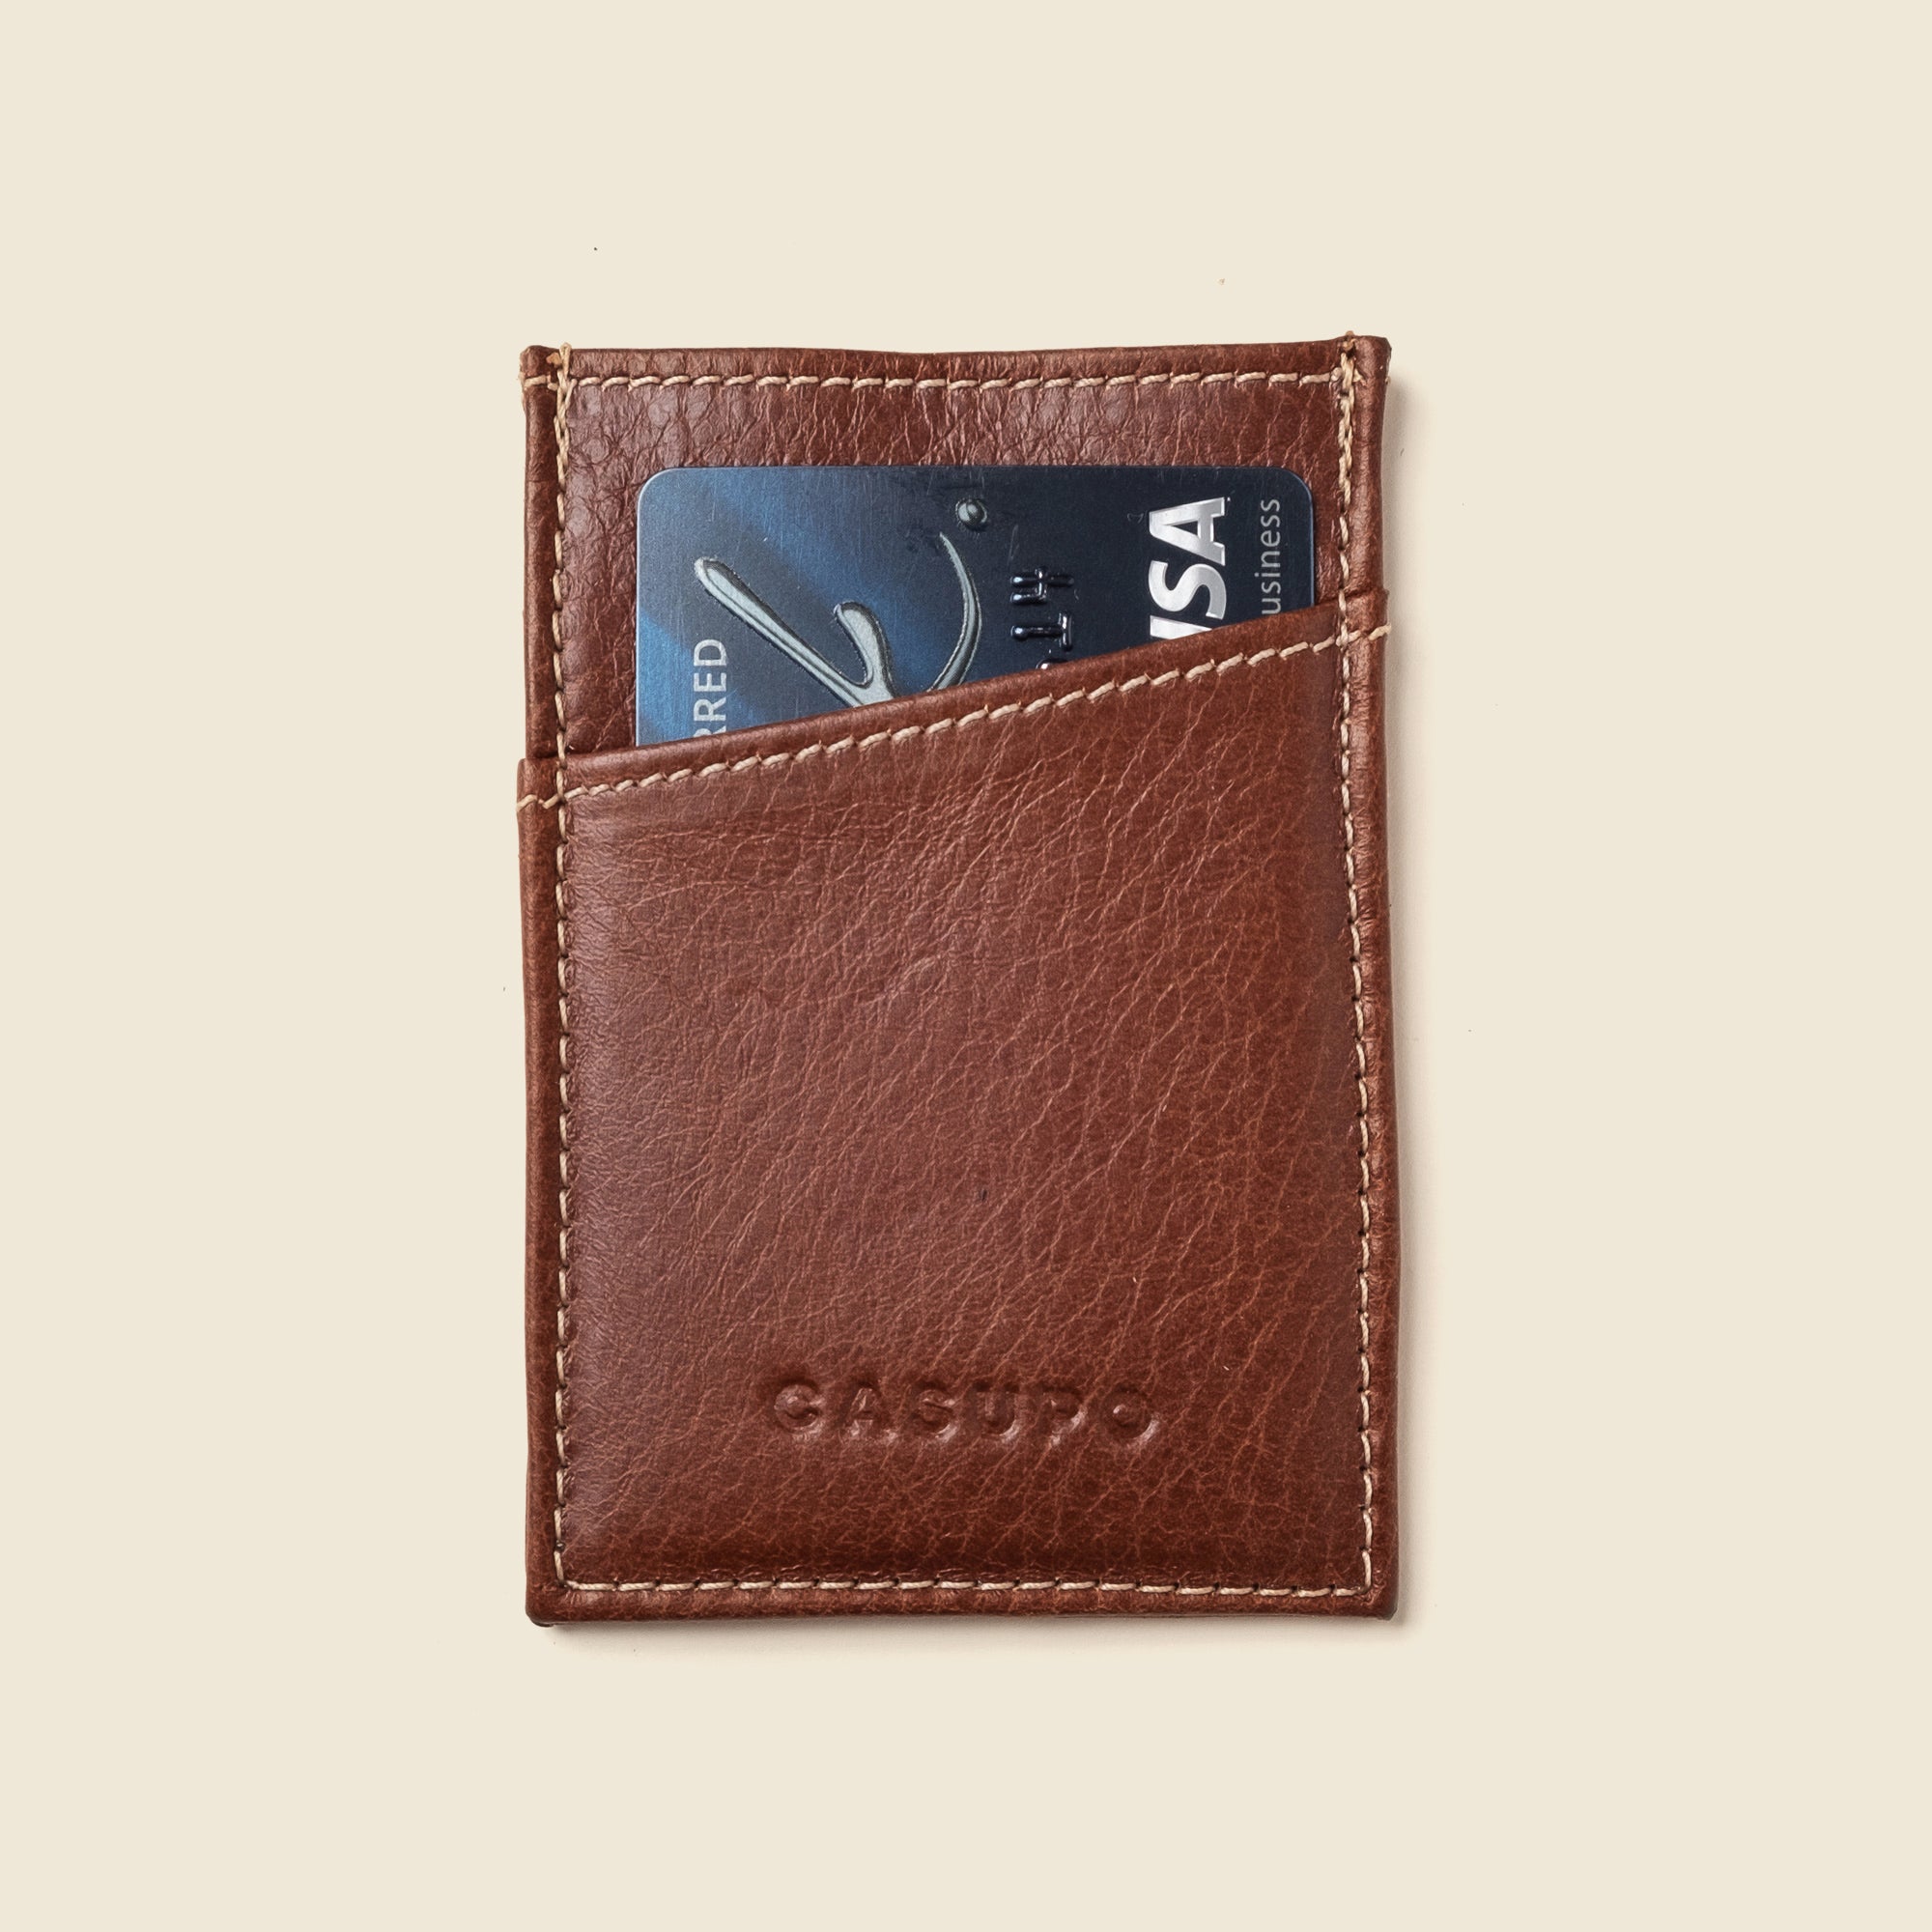 Best father's day gifts ideas for leather lovers